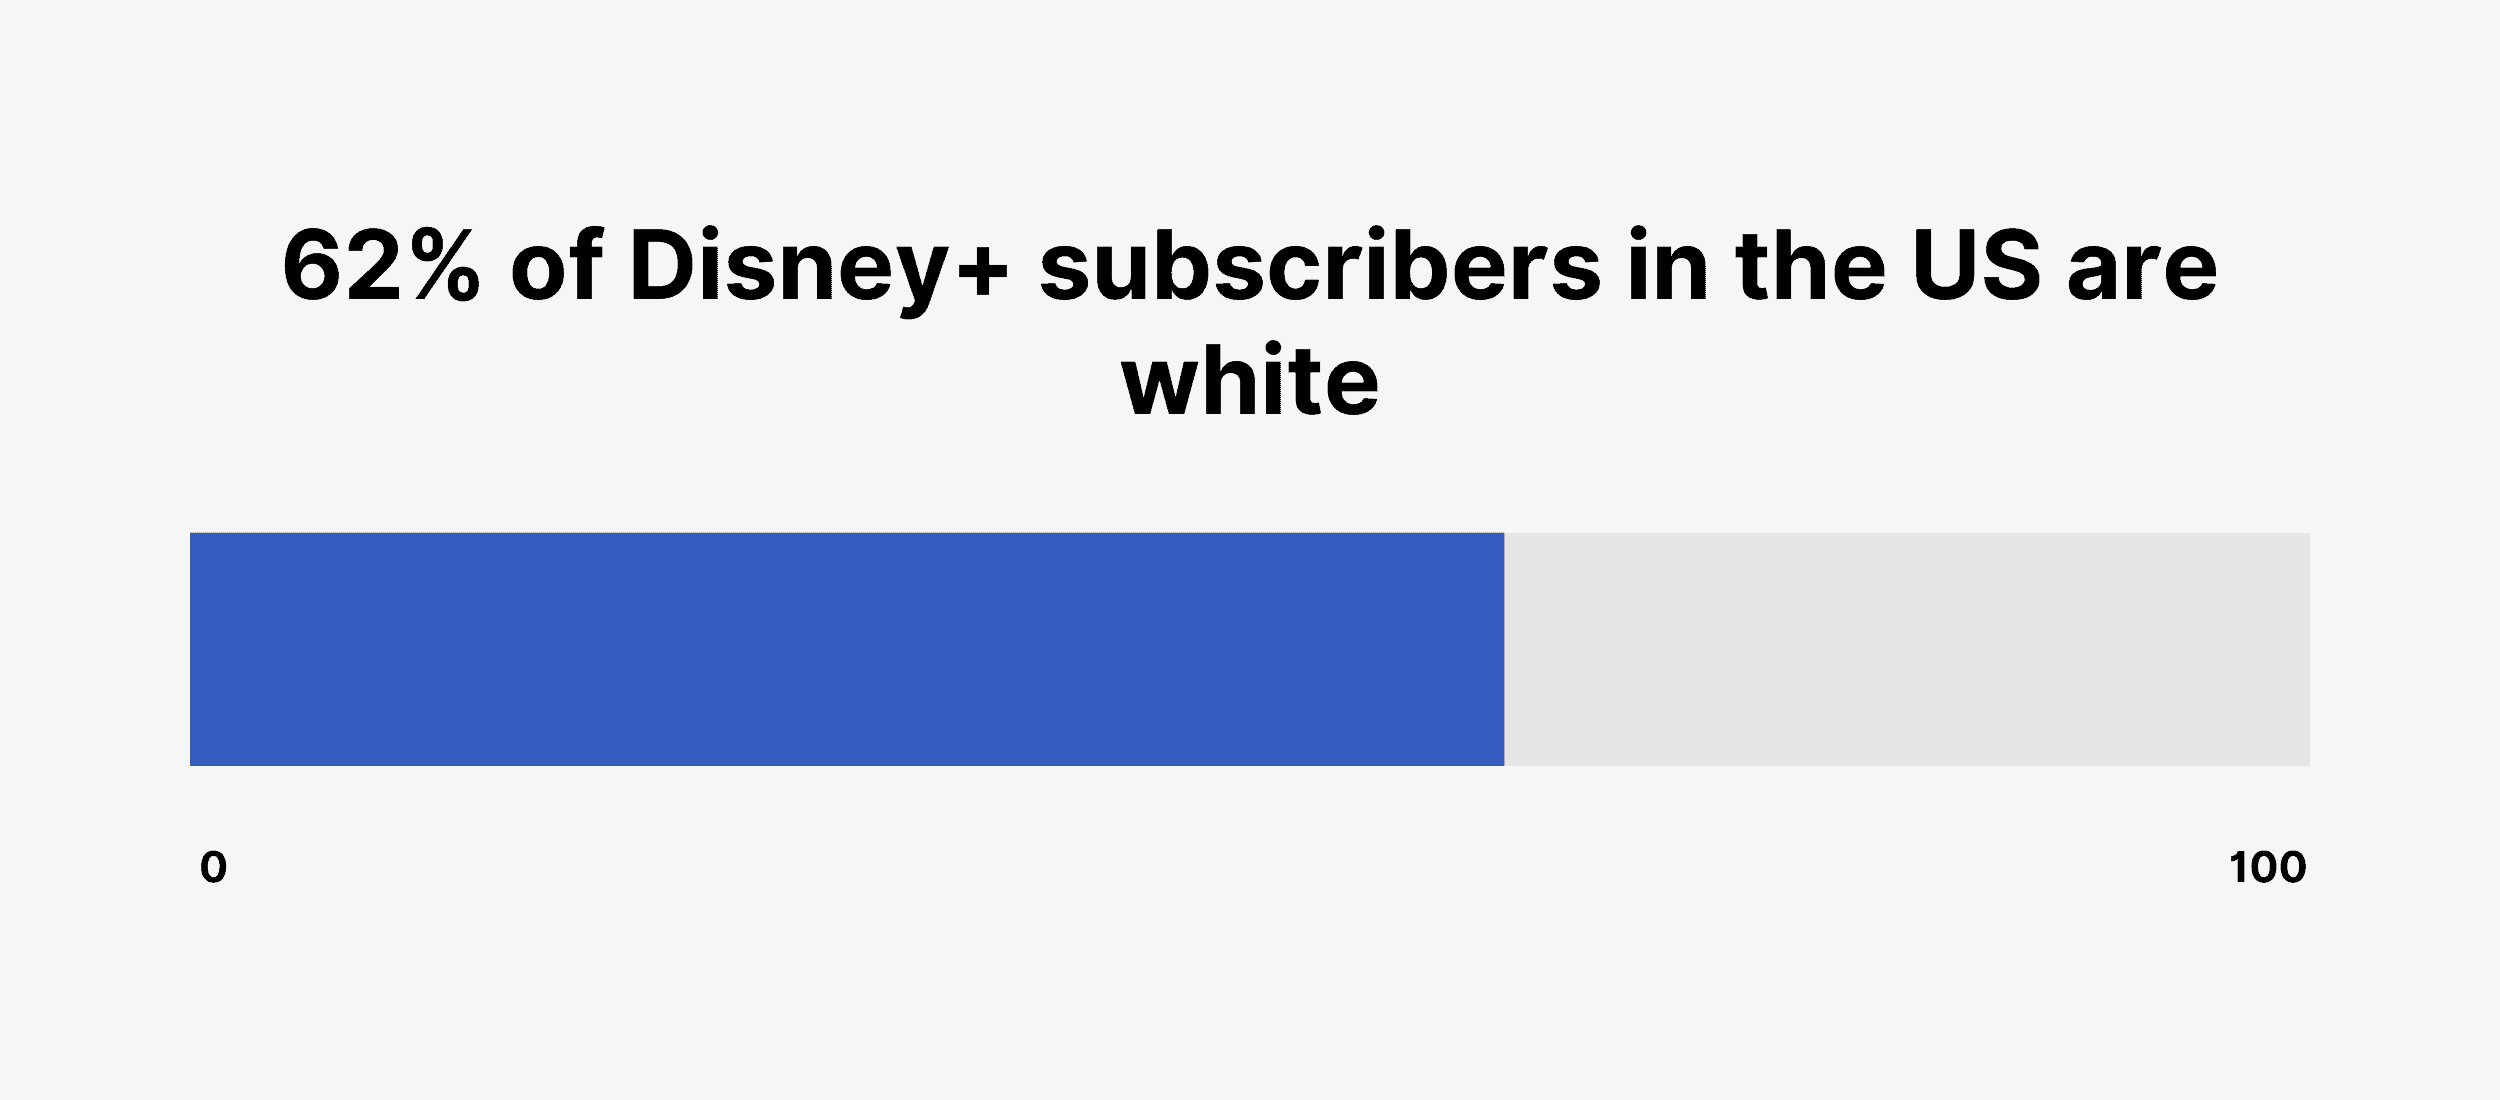 62% of Disney+ subscribers in the US are white